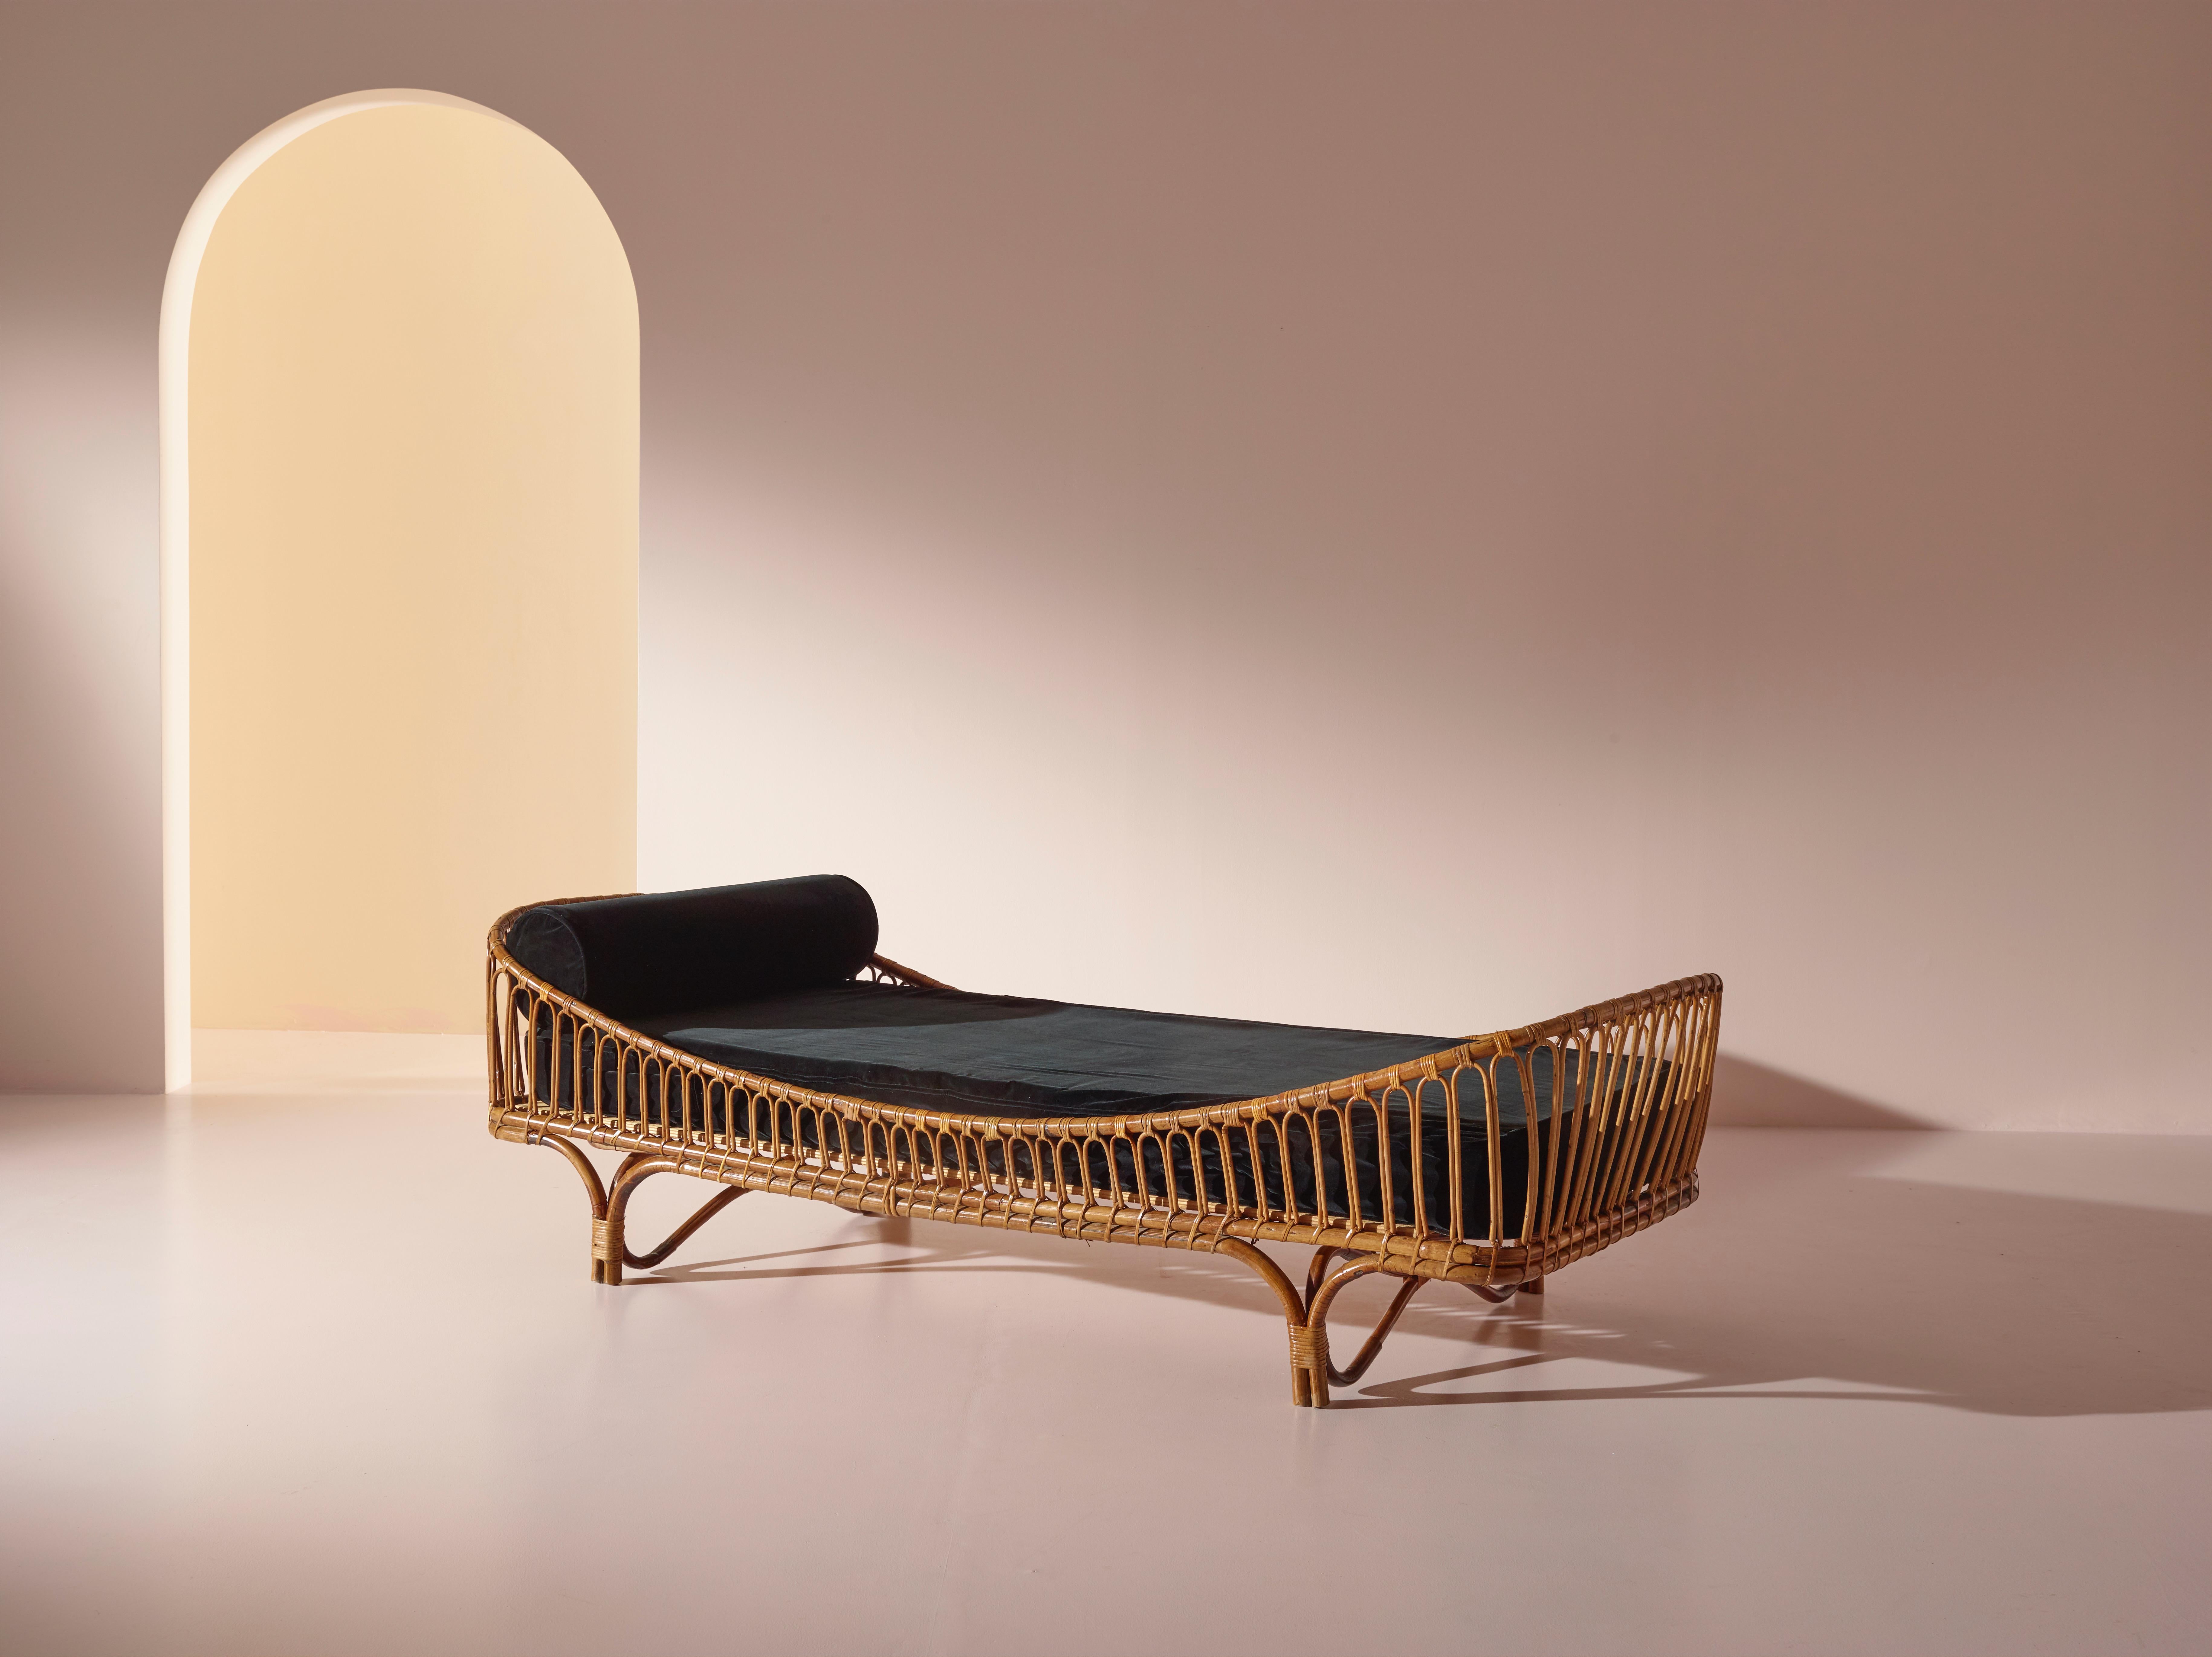 This bamboo and rattan daybed designed by Mario Cristiani in the early 1960s is a beautiful and rare piece of furniture that exudes a sense of exoticism and glamour. Its unique design is characterized by the use of natural materials and a